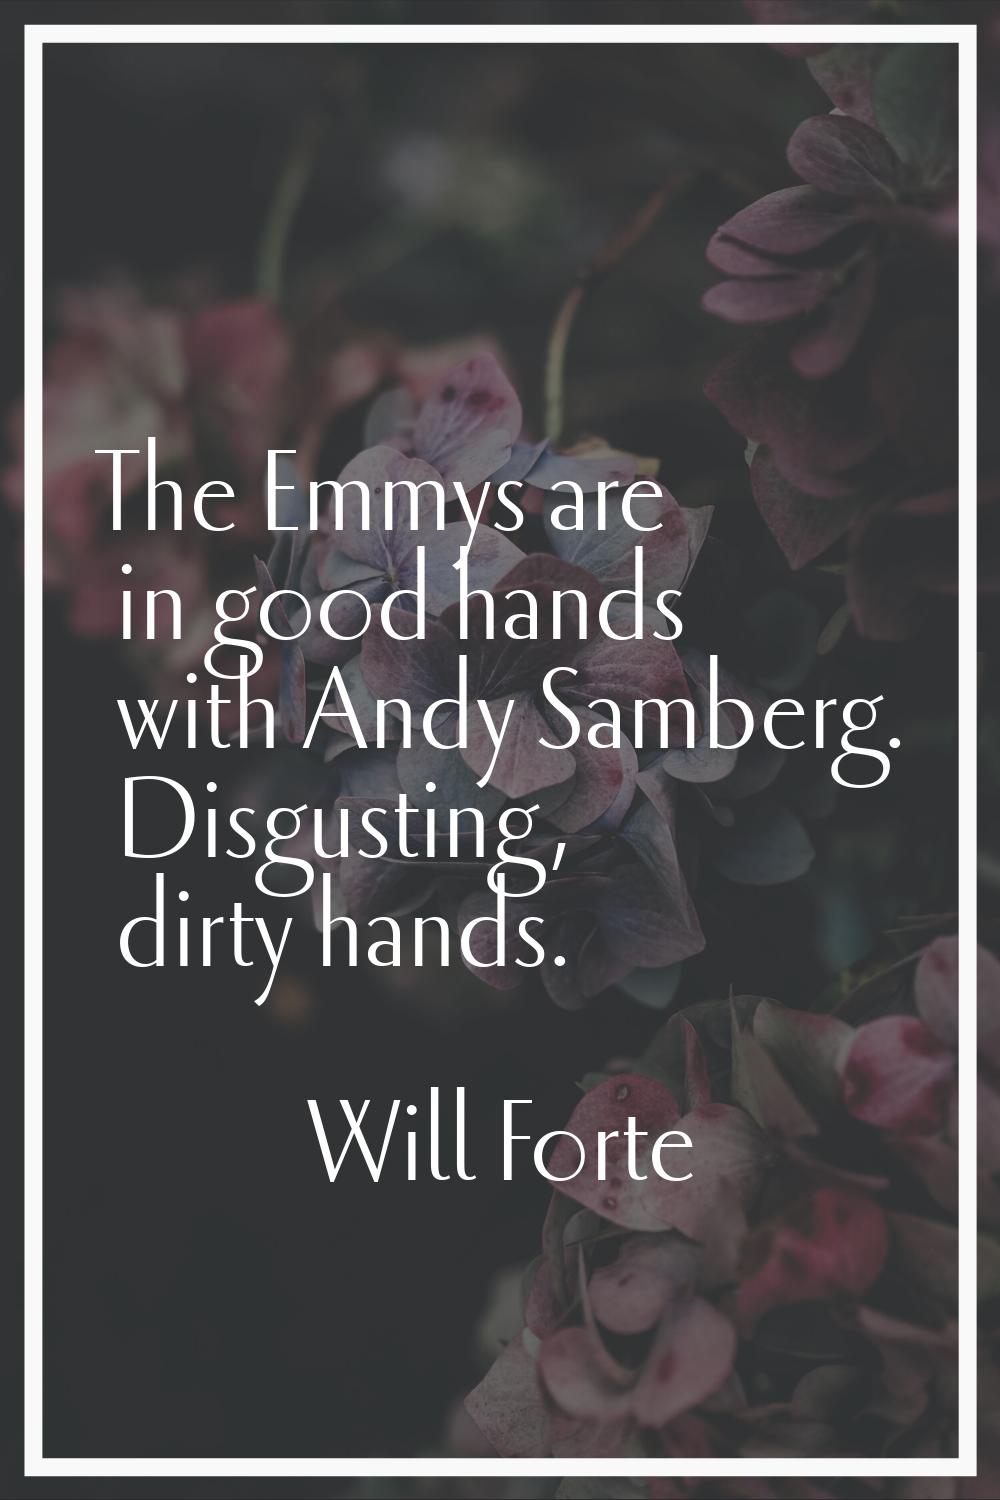 The Emmys are in good hands with Andy Samberg. Disgusting, dirty hands.